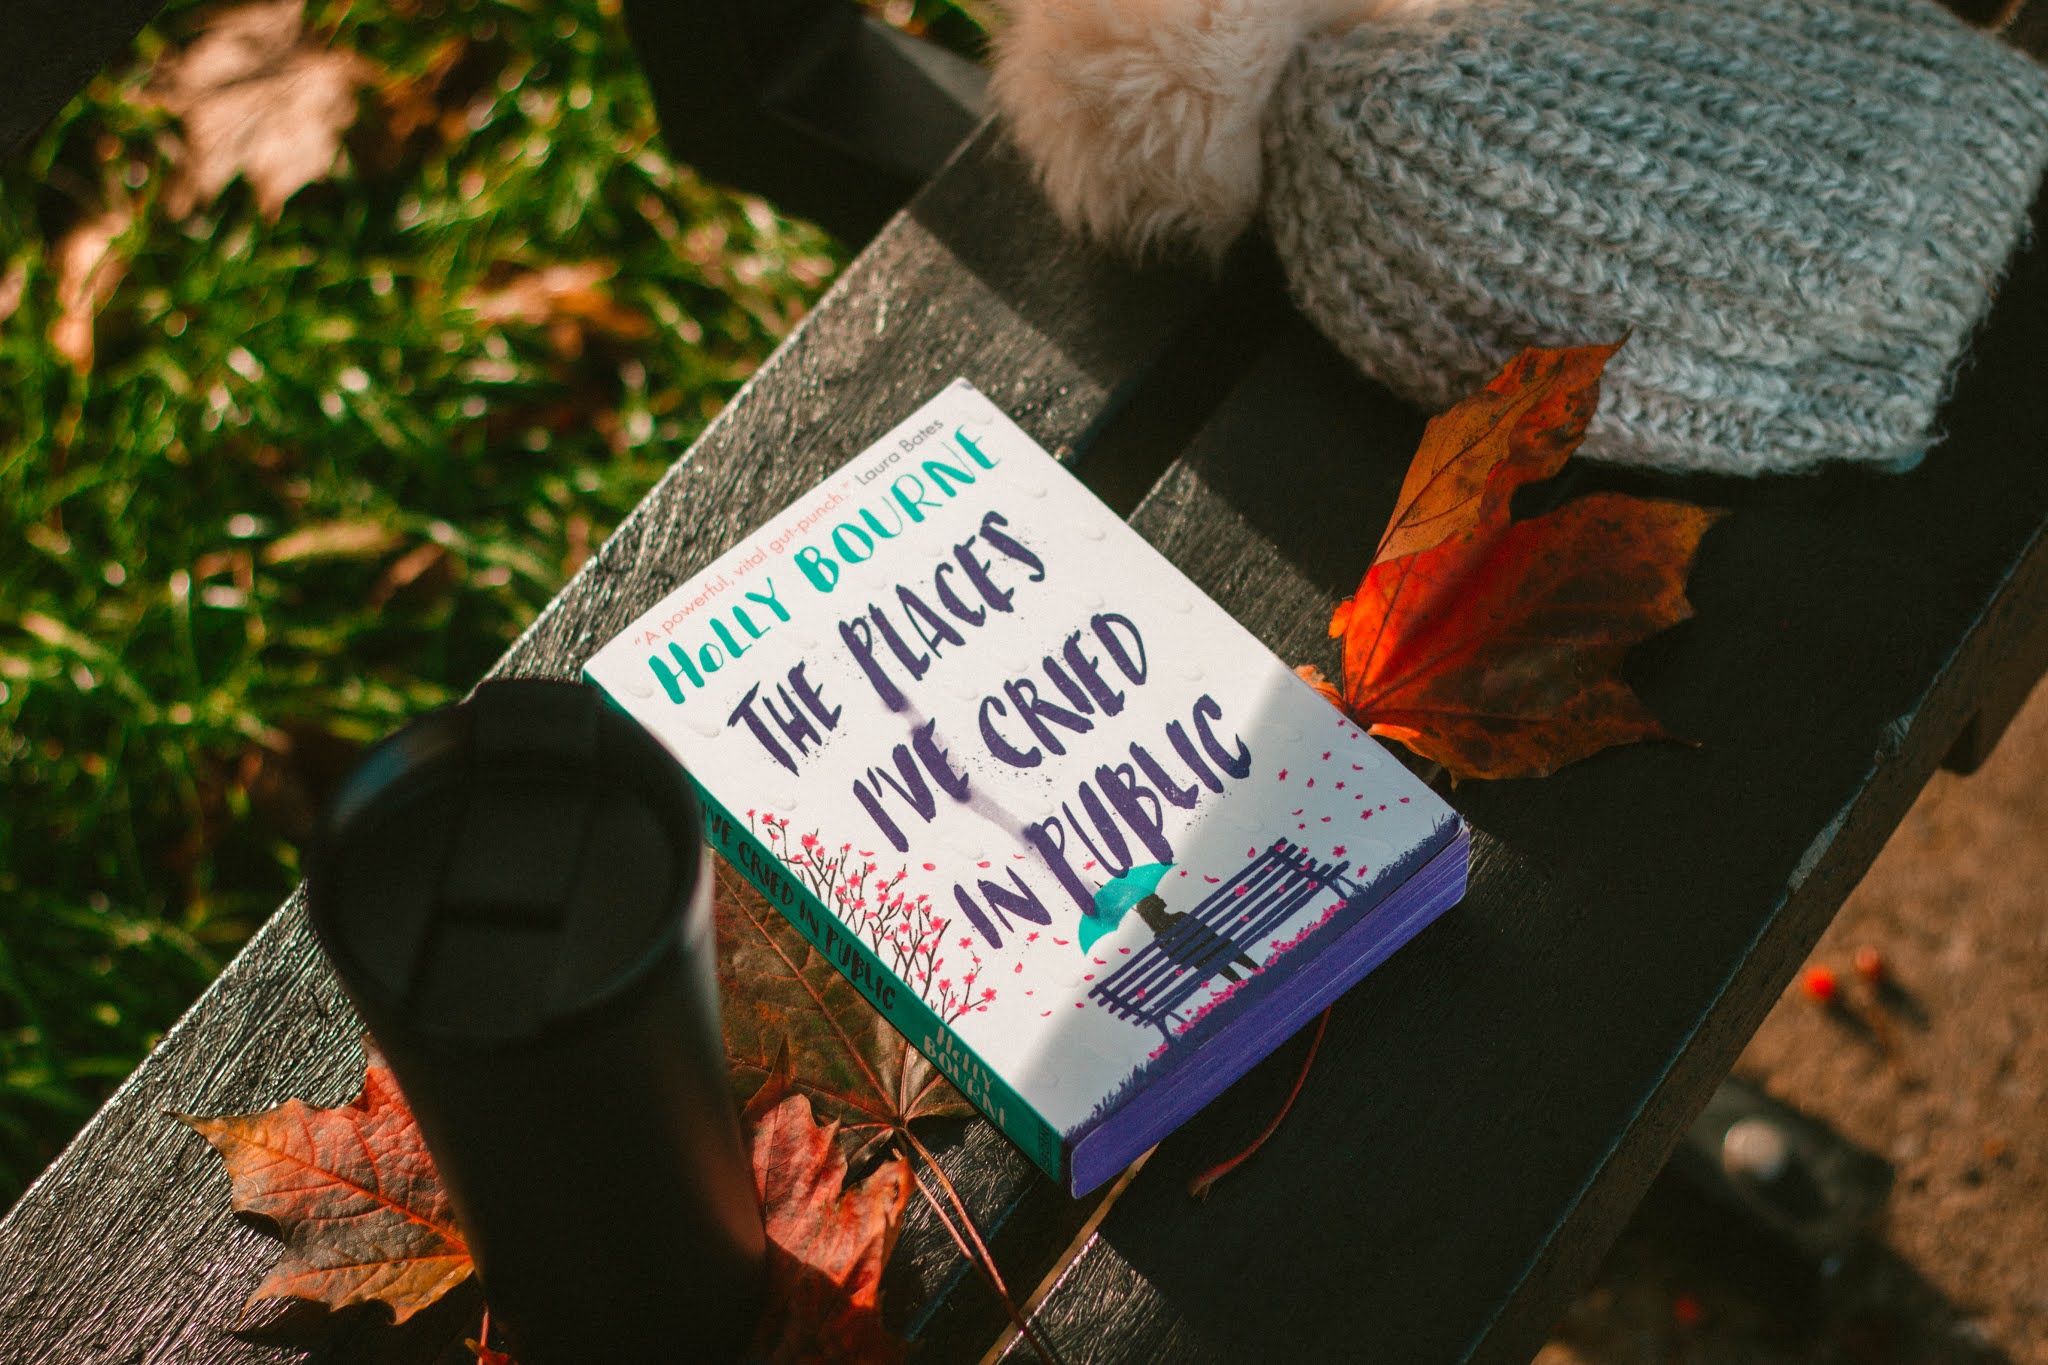 The Places I've Cried in Public by Holly Bourne - on public bench with autumn leaves. YA book review